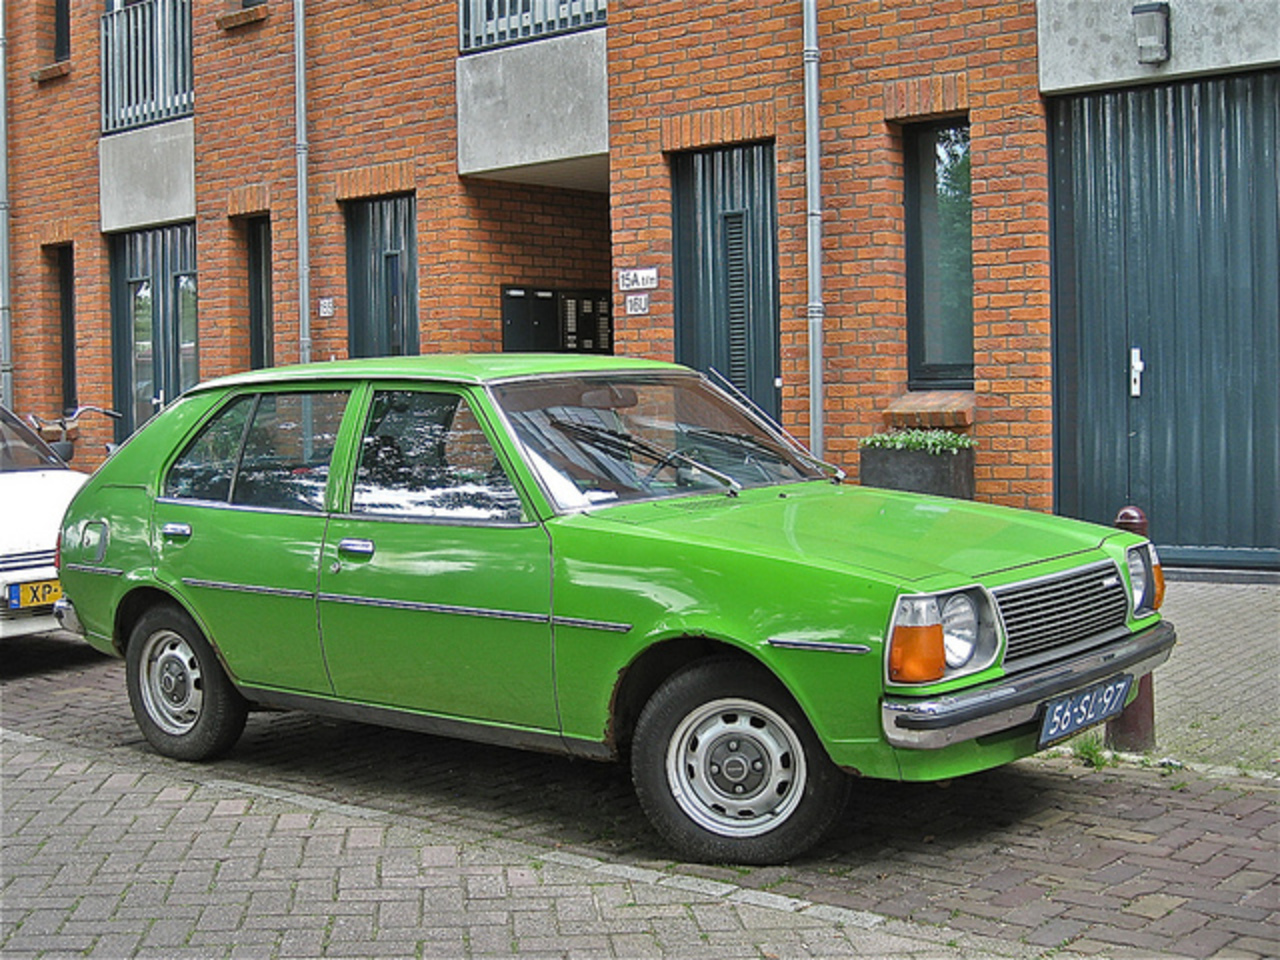 56-SL-97 MAZDA 323 1300 ES, 1977. Another typical 70s passengers car: